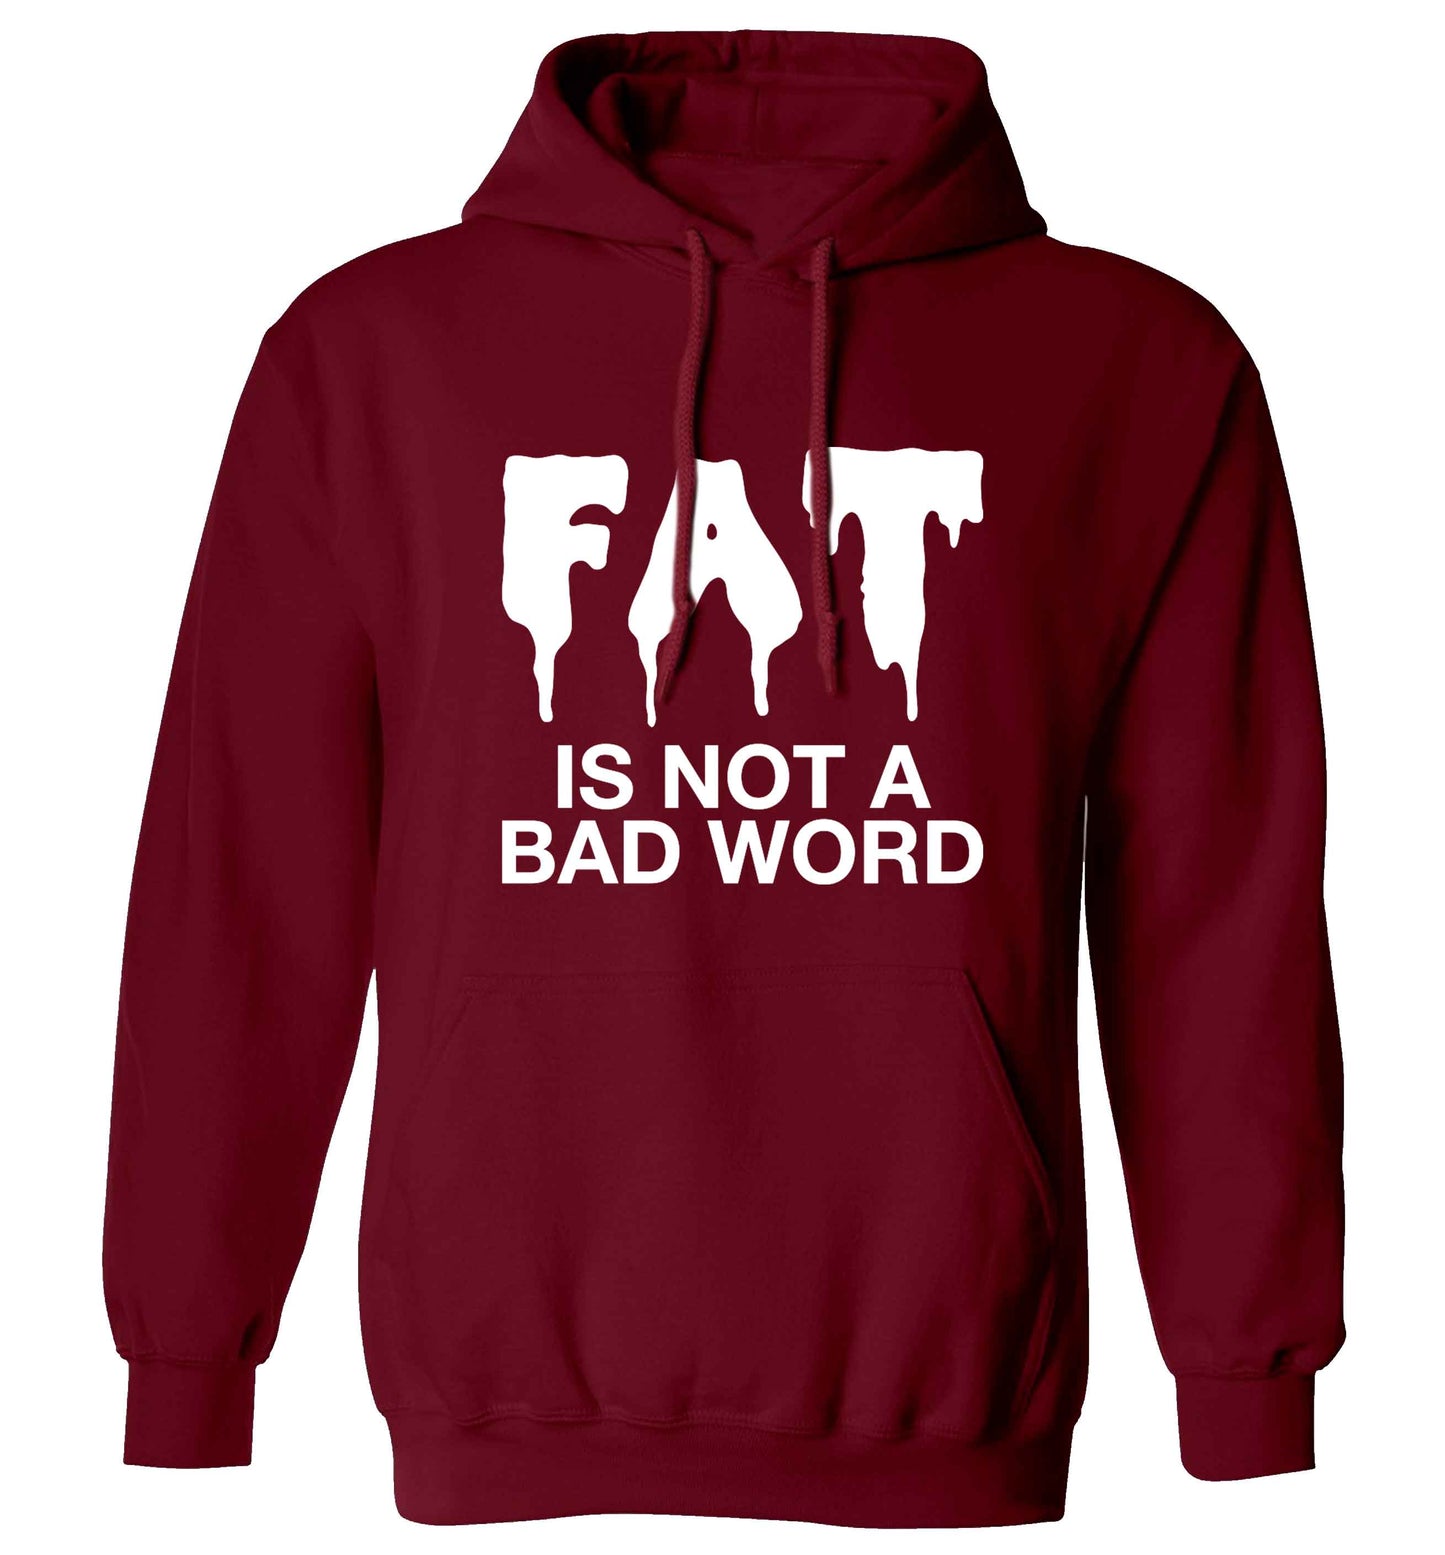 Fat is not a bad word adults unisex maroon hoodie 2XL